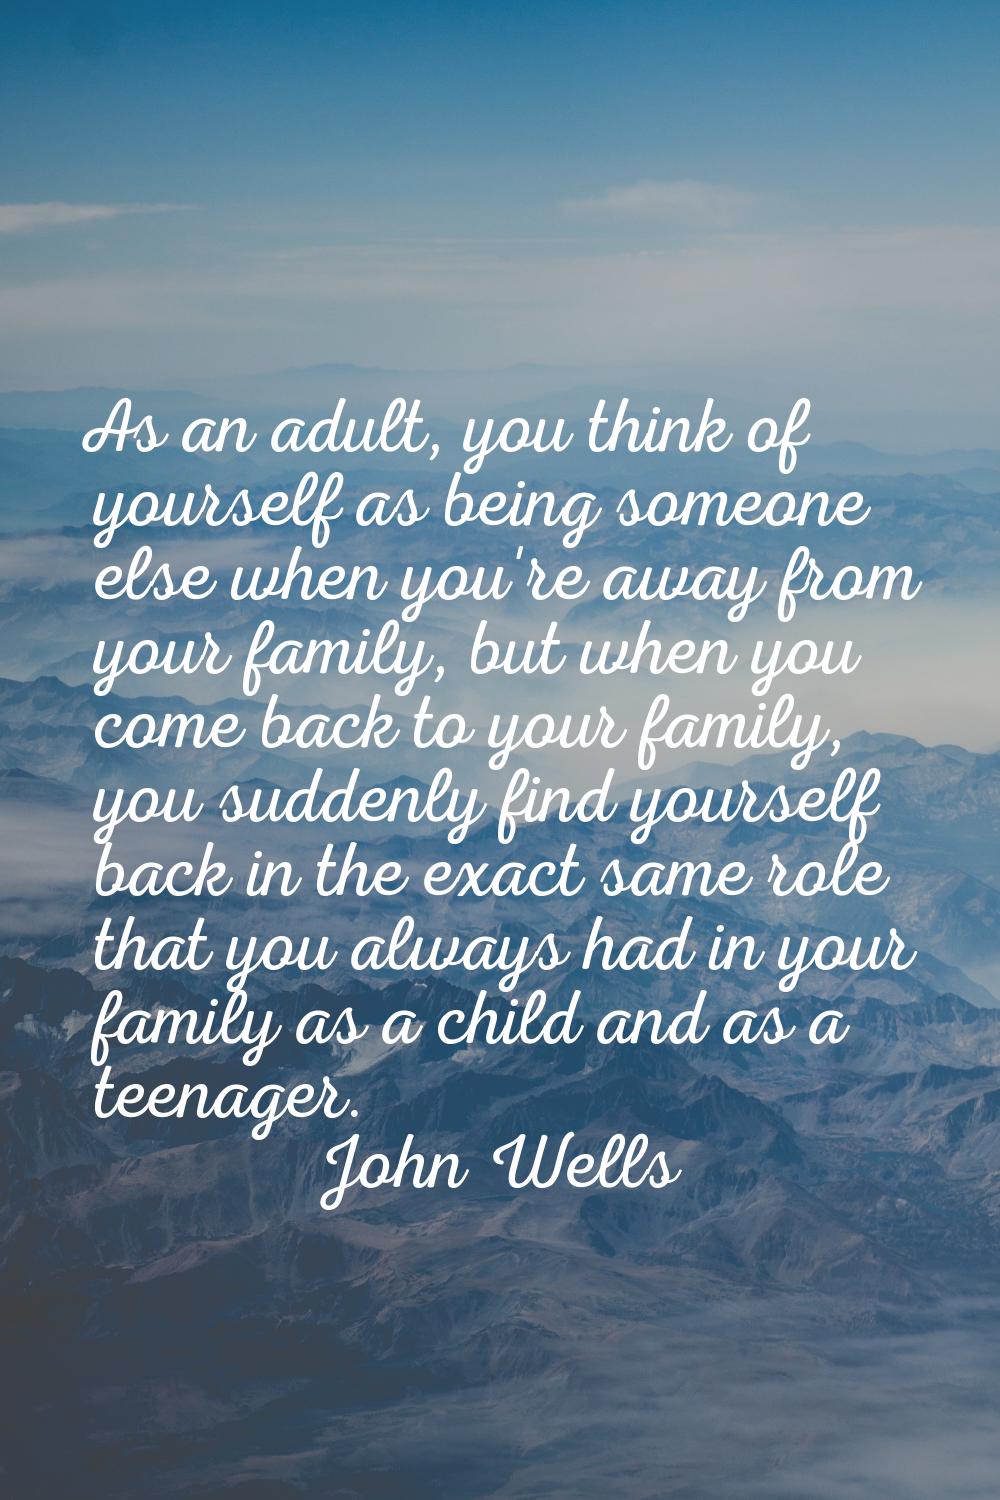 As an adult, you think of yourself as being someone else when you're away from your family, but whe